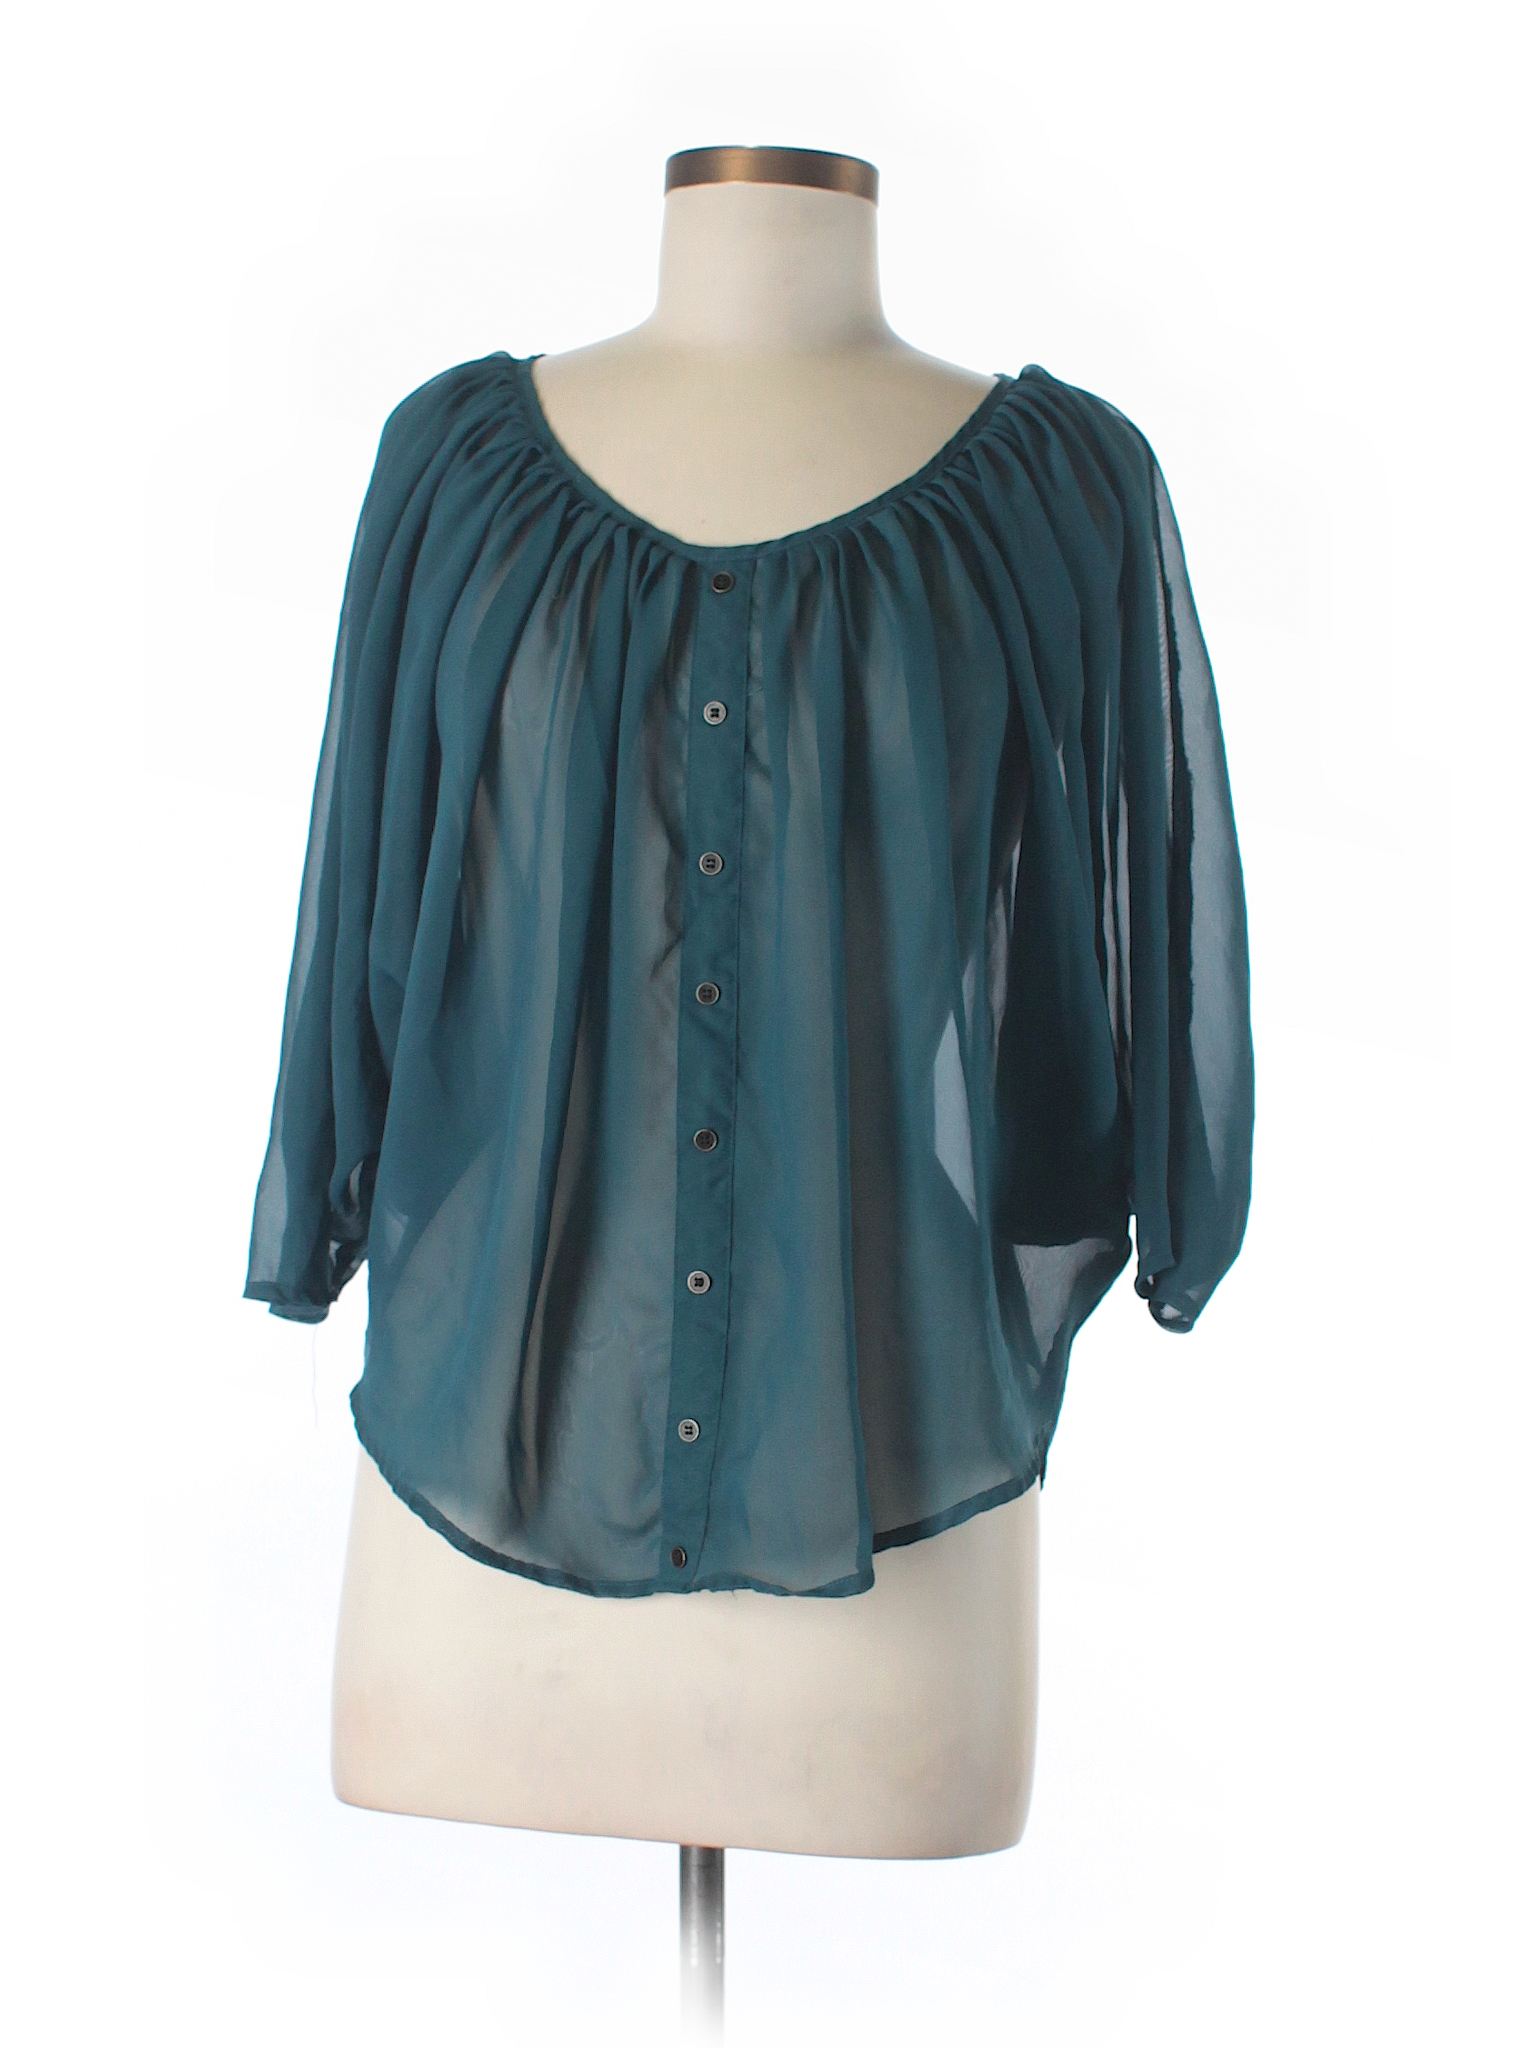 Poetry Clothing 100% Polyester Solid Teal 3/4 Sleeve Blouse Size M - 88 ...